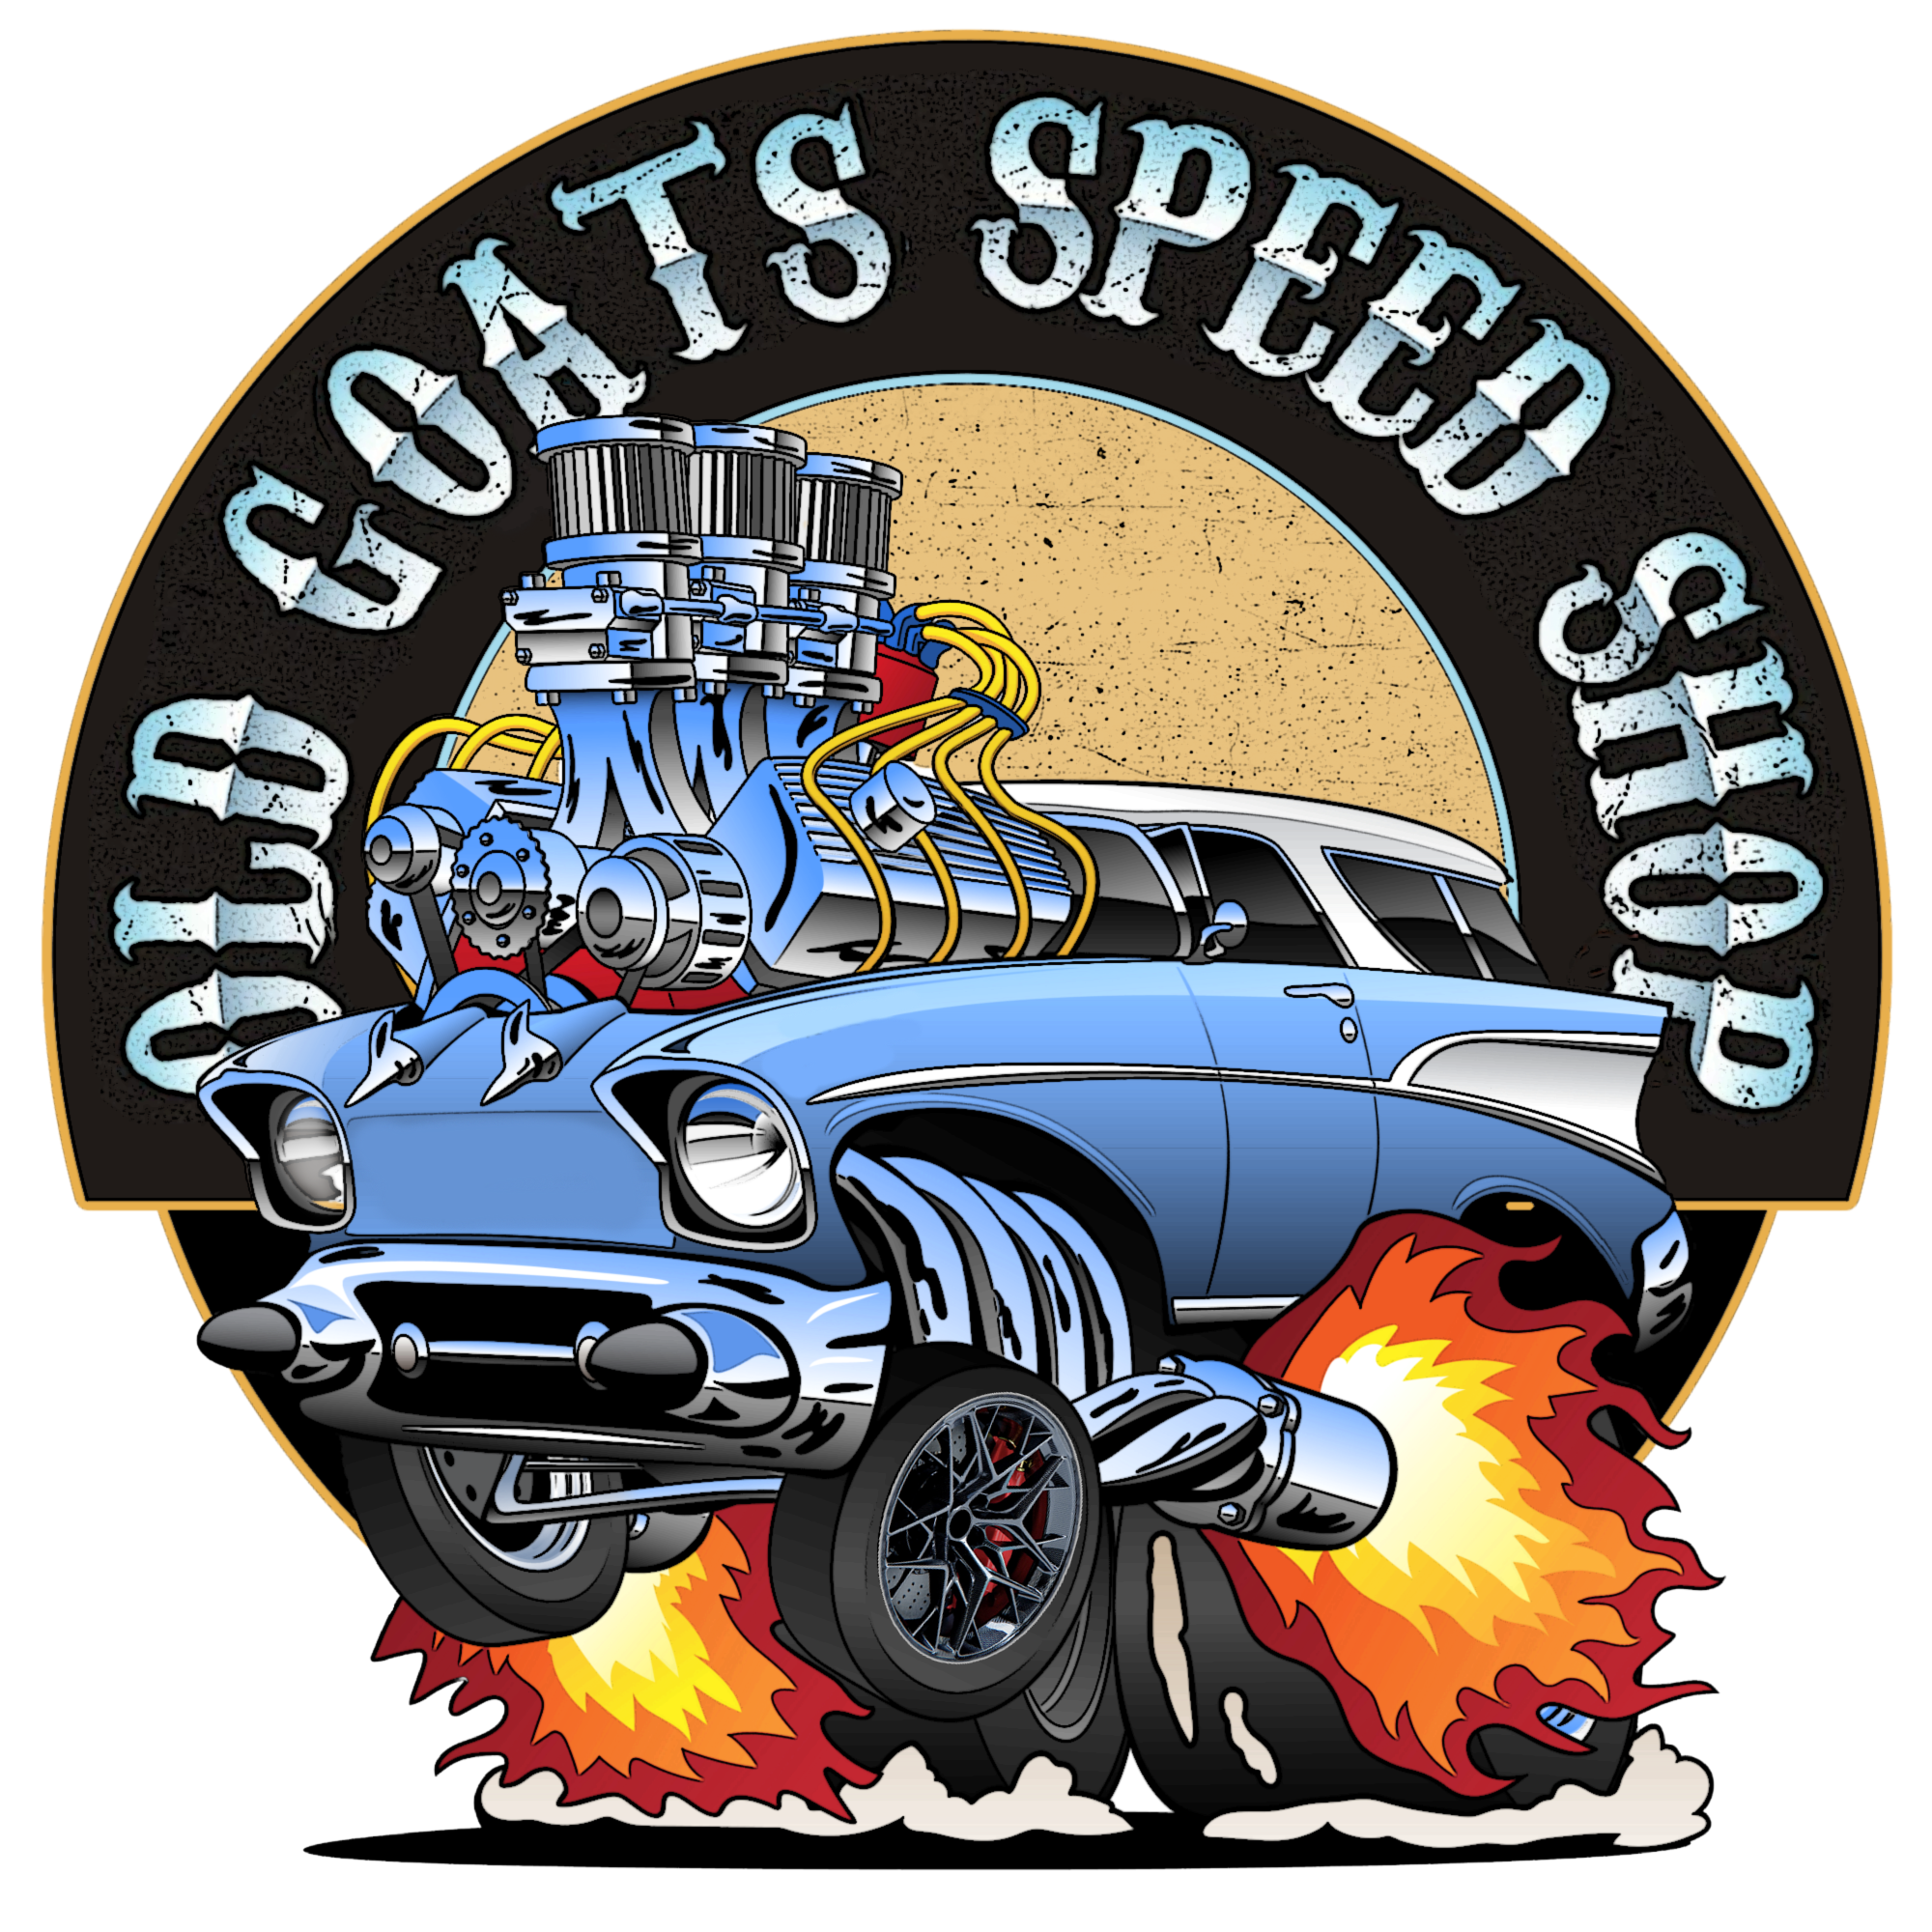 Old Goats Speed Shop - 1957 Chevy Nomad - Image